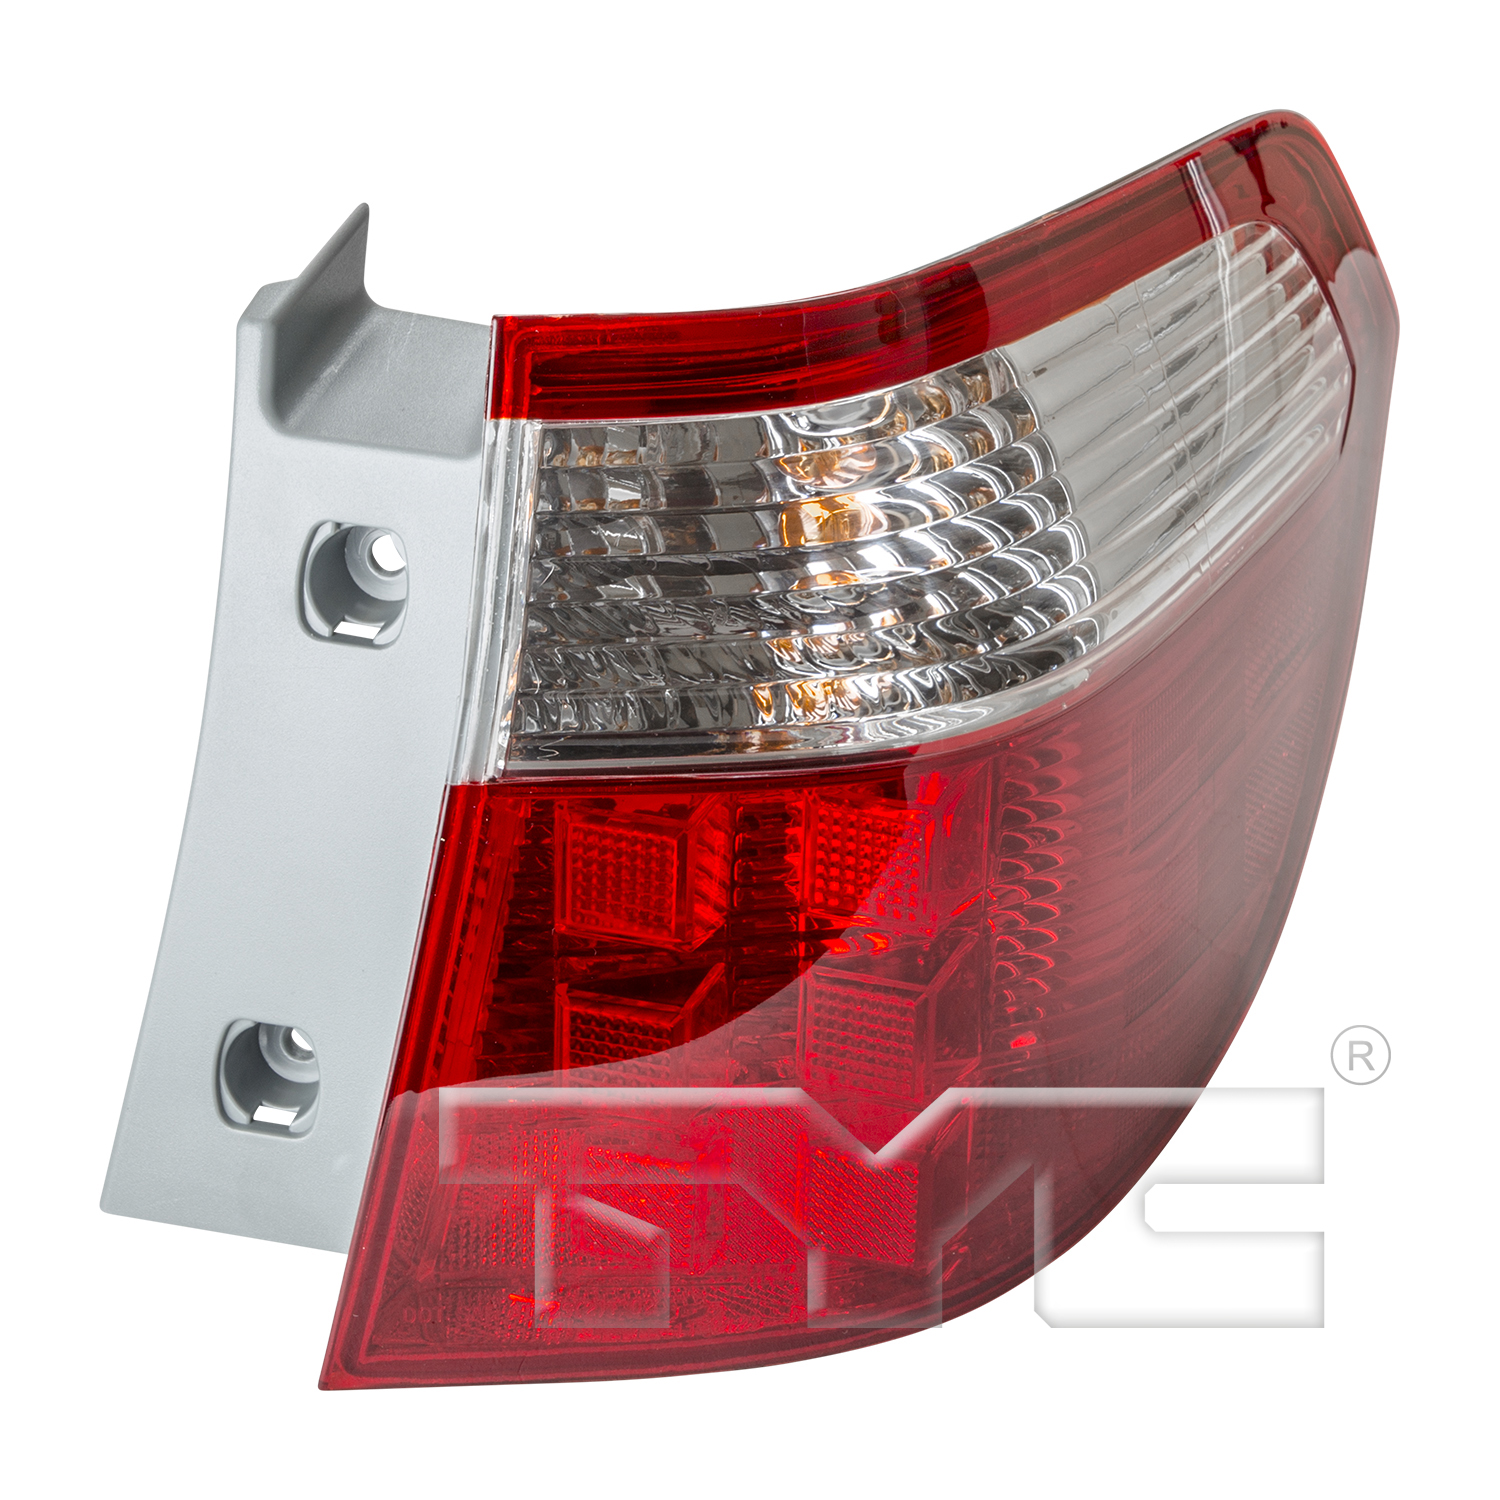 Aftermarket TAILLIGHTS for HONDA - ODYSSEY, ODYSSEY,05-07,RT Taillamp lens/housing